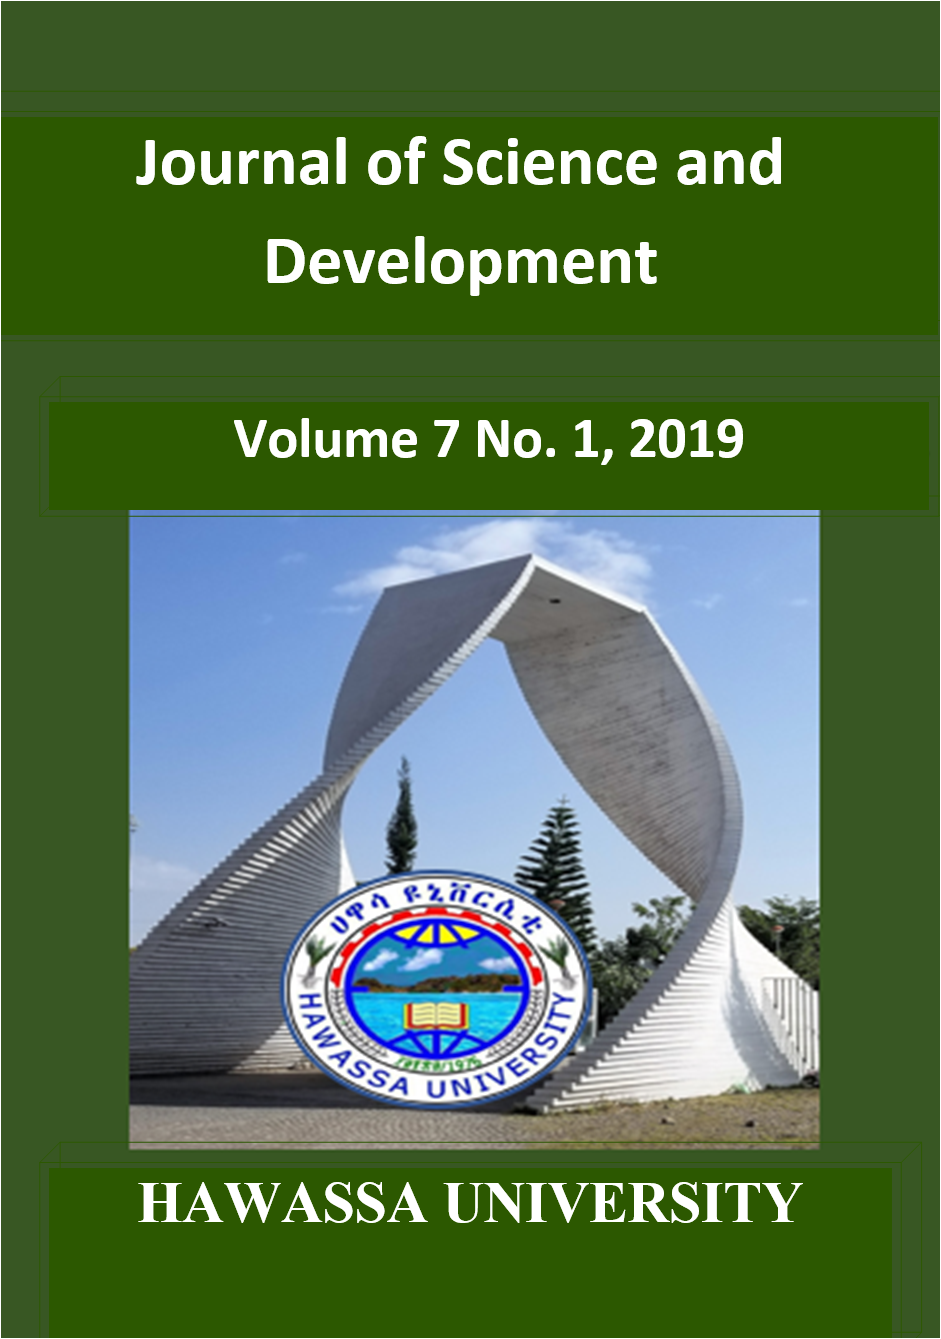 					View Vol. 7 No. 1 (2019): Journal of Science and Development, JSD
				